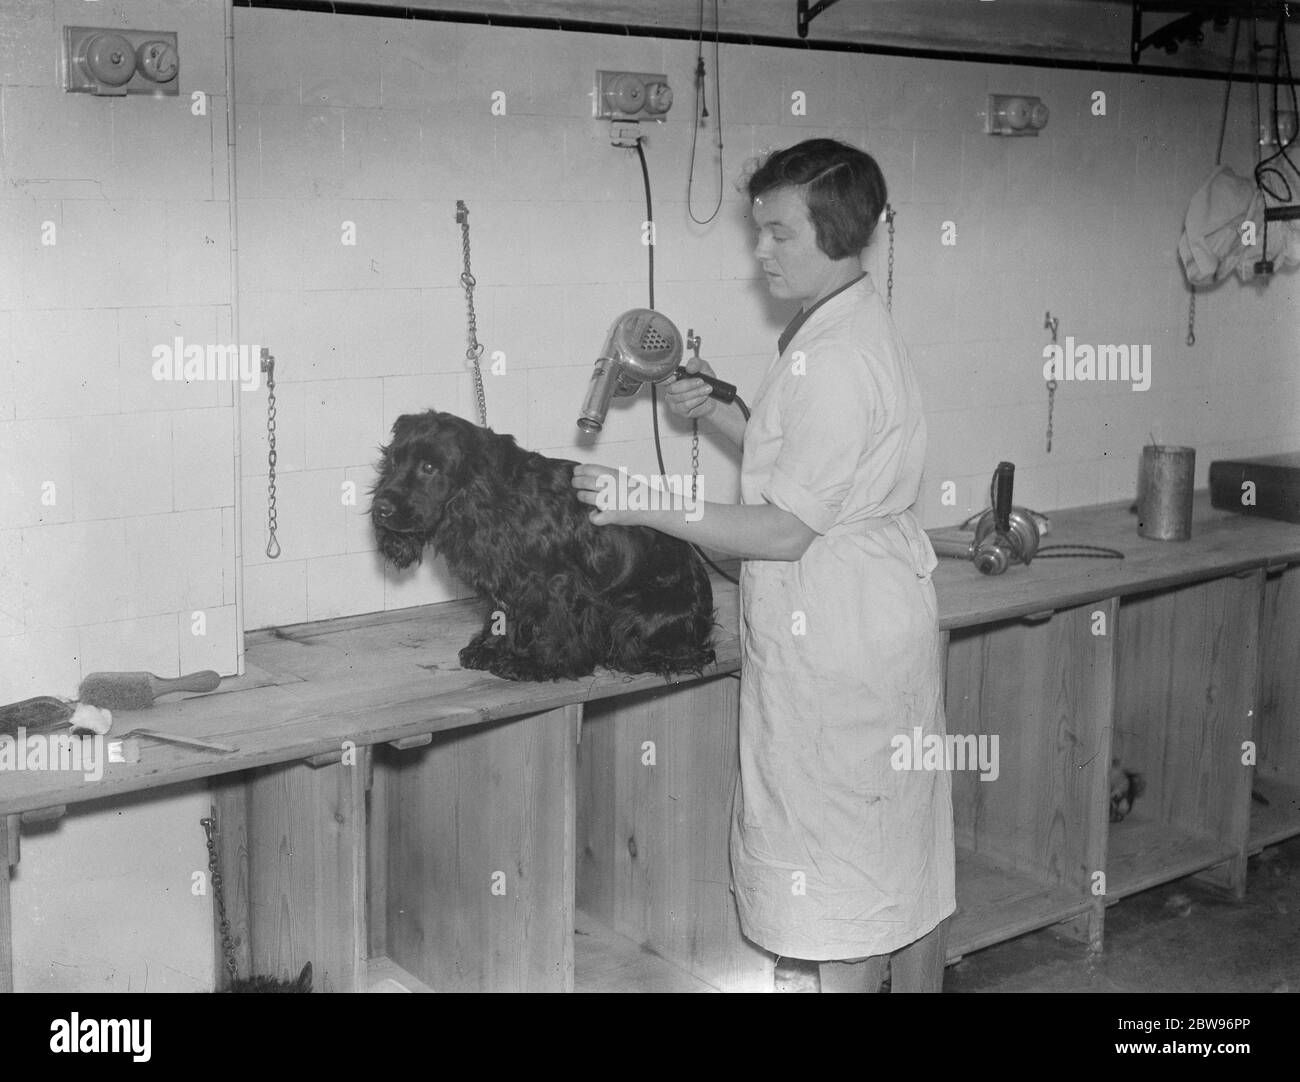 Electrical massage and drying for entries at Crufts show . The best dogs in the world are now being prepared for the opening of Crufts dog show at the Royal Agricultural Hall , London , the largest dog in the world . A cocker Spaniel being electrically massaged and dried at a London dog Saloon for the show . 8 February 1932 Stock Photo